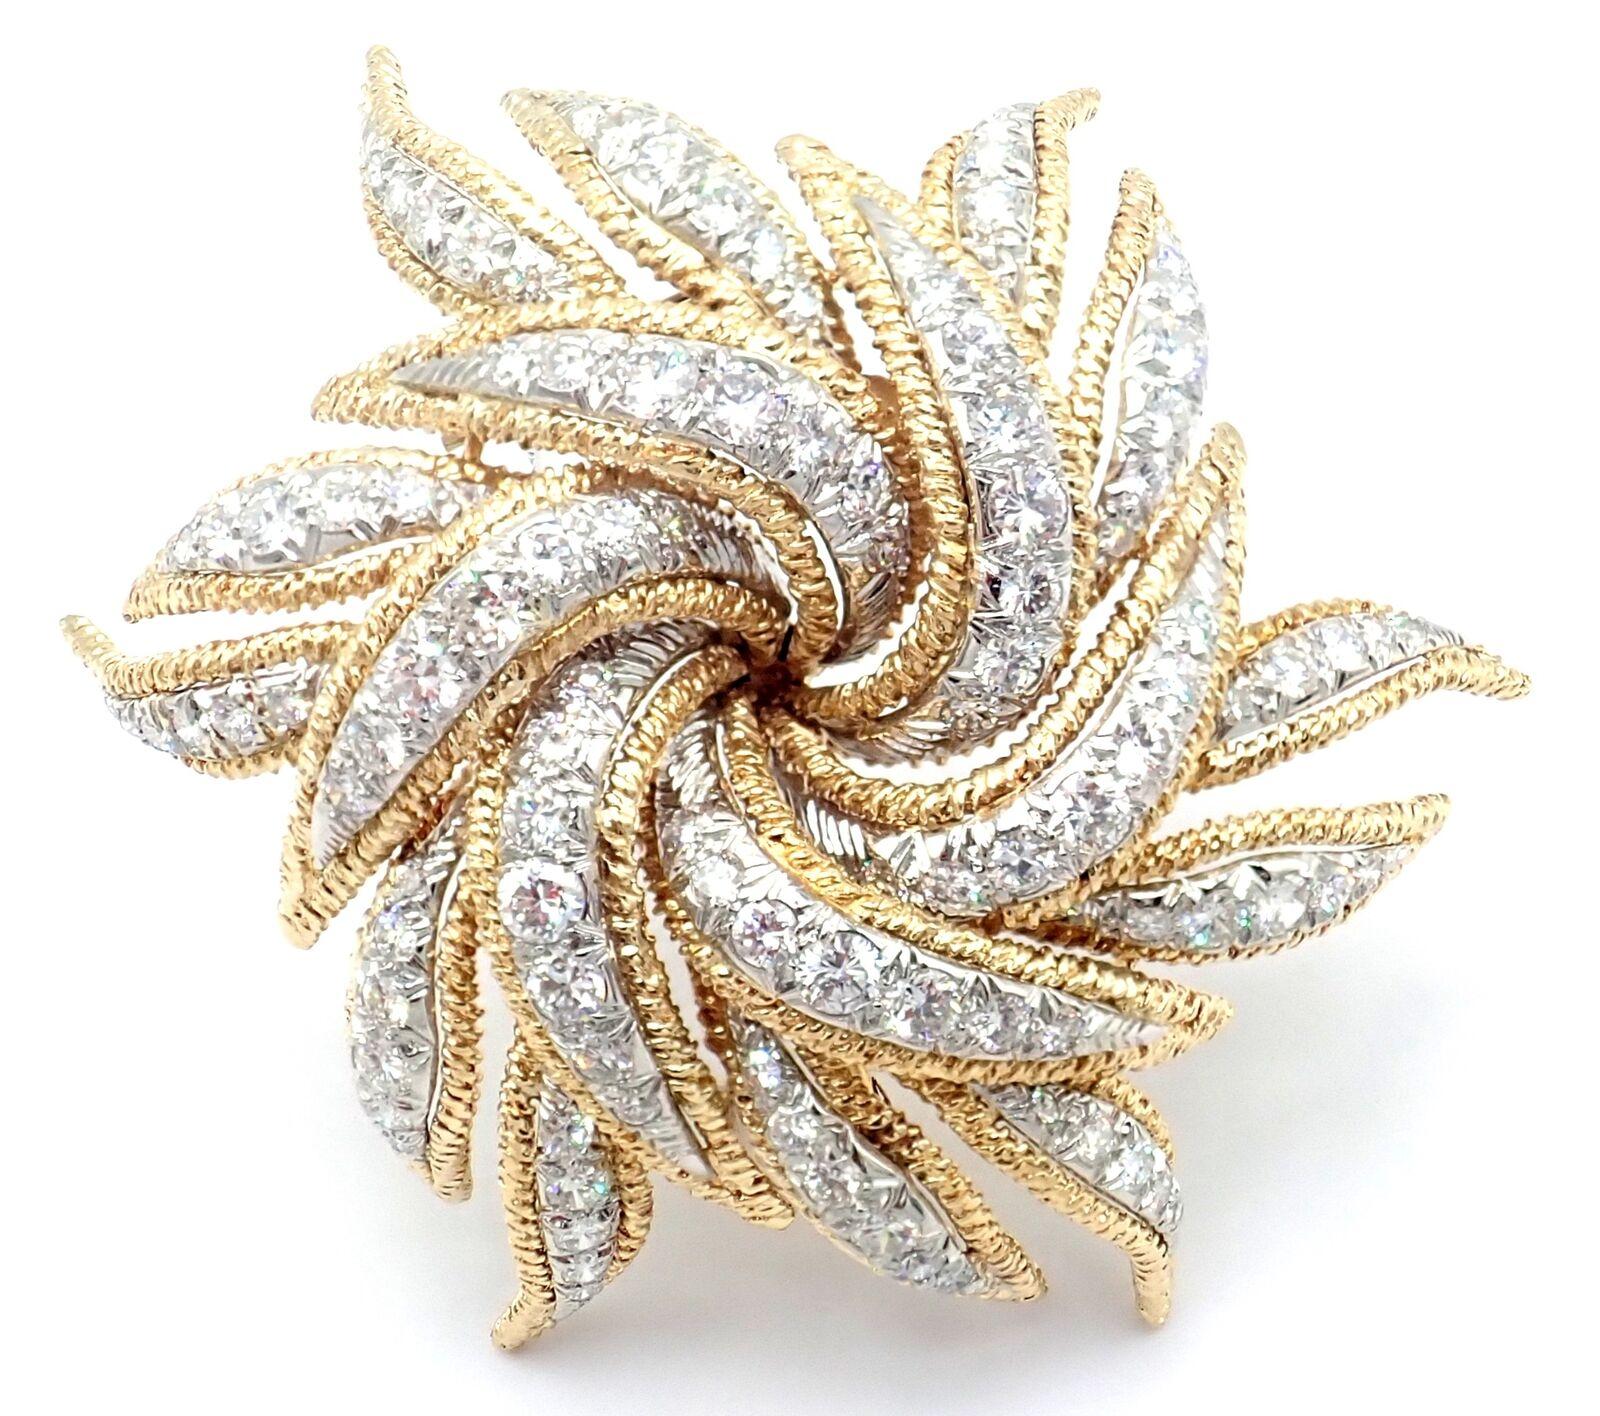 18k Yellow Gold And Platinum Diamond Large Pin Brooch by David Webb. 
With Round brilliant cut diamonds VS1 clarity, G color total weight approximately 4.5ct
Details: 
Measurements:	58mm x 54mm
Weight: 35.2 grams
Stamped Hallmark: David Webb 18K 10%